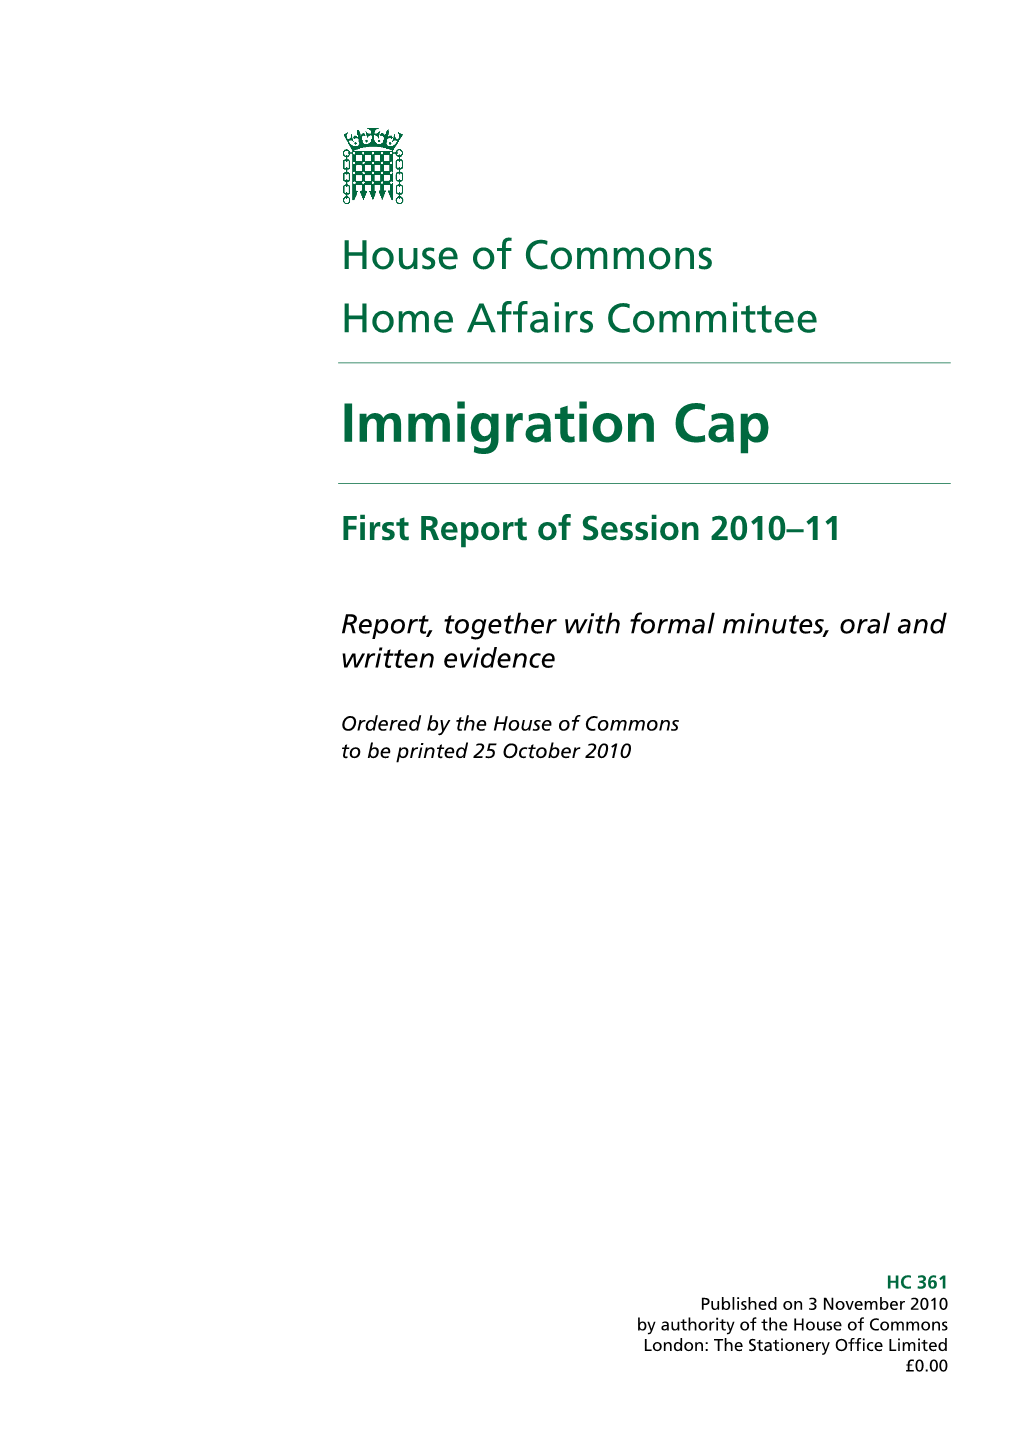 Home Affairs Select Committee Is Undertaking an Inquiry Into the Cap on Non-EU Economic Migration